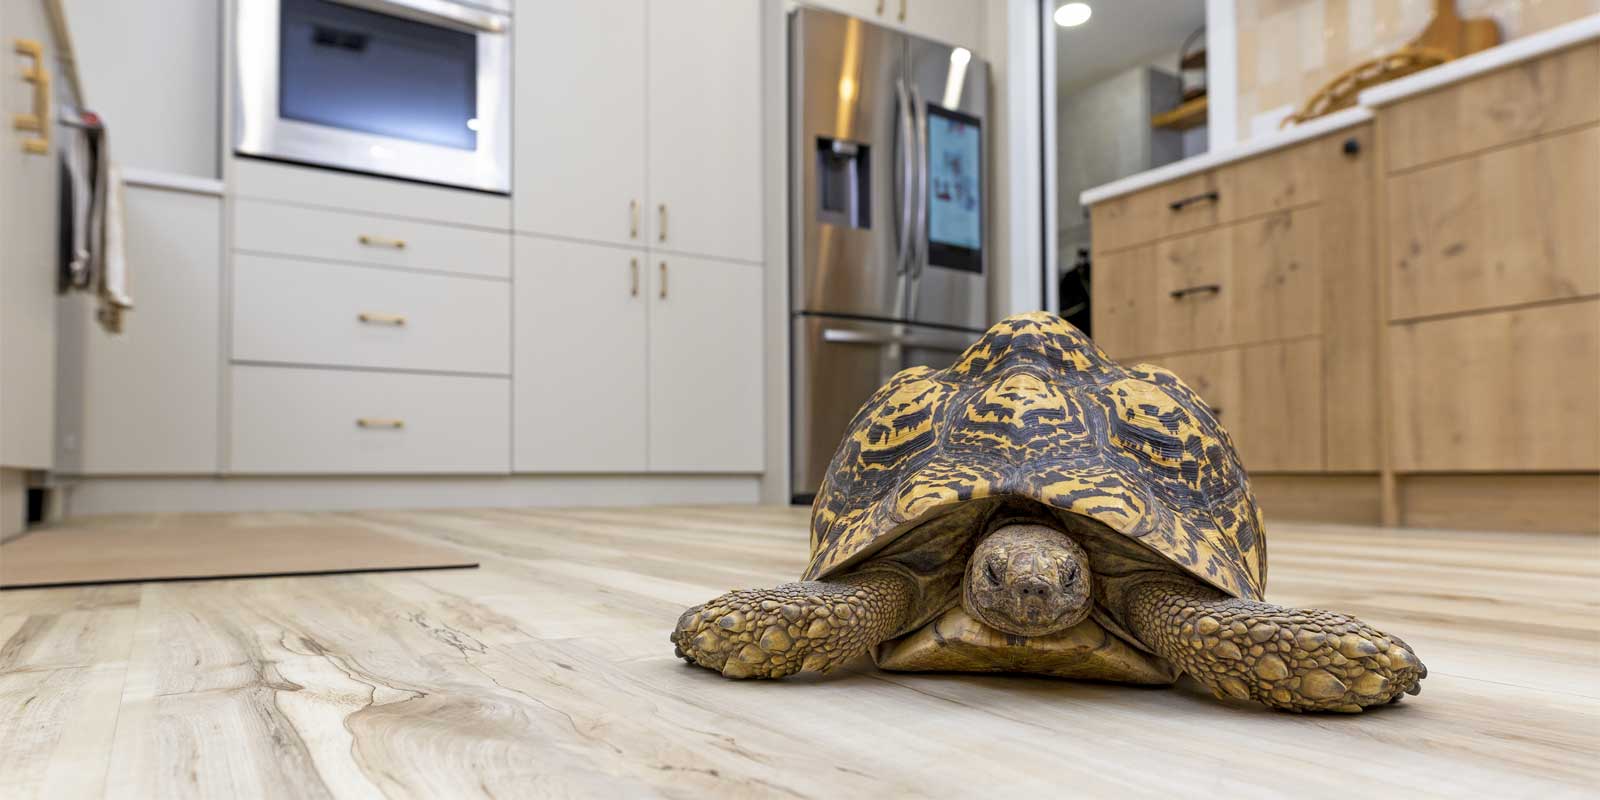 Interior image of full kitchen makeover featuring a tortise